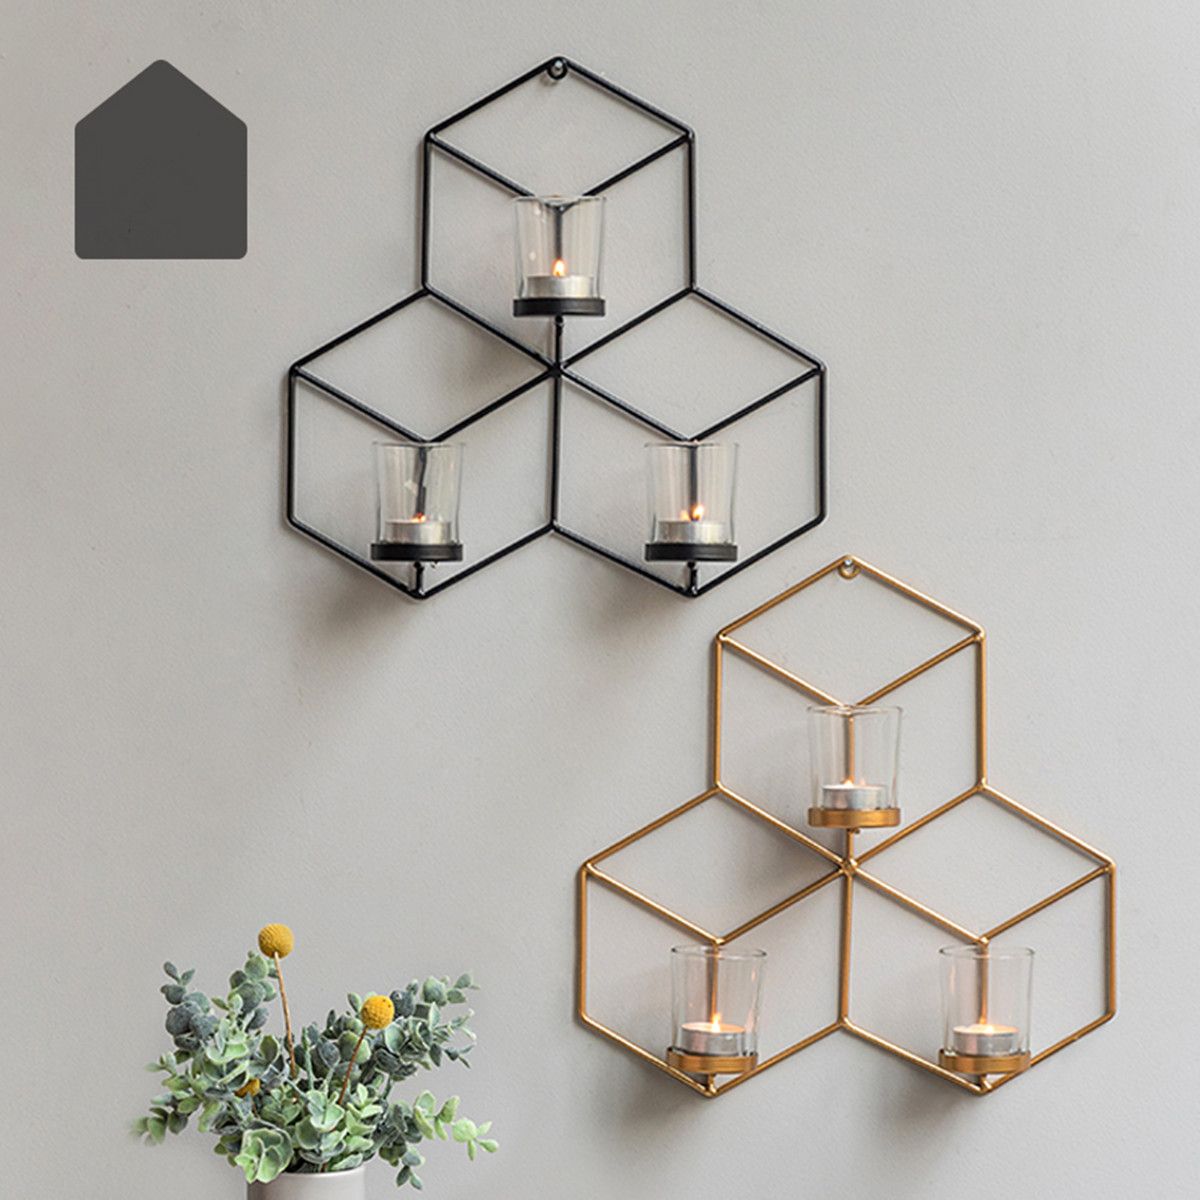 3D-Geometric-Nordic-Style-Candle-Holder-Iron-Candlestick-Handmade-Wall-Art-Room-Home-Decor-1390551